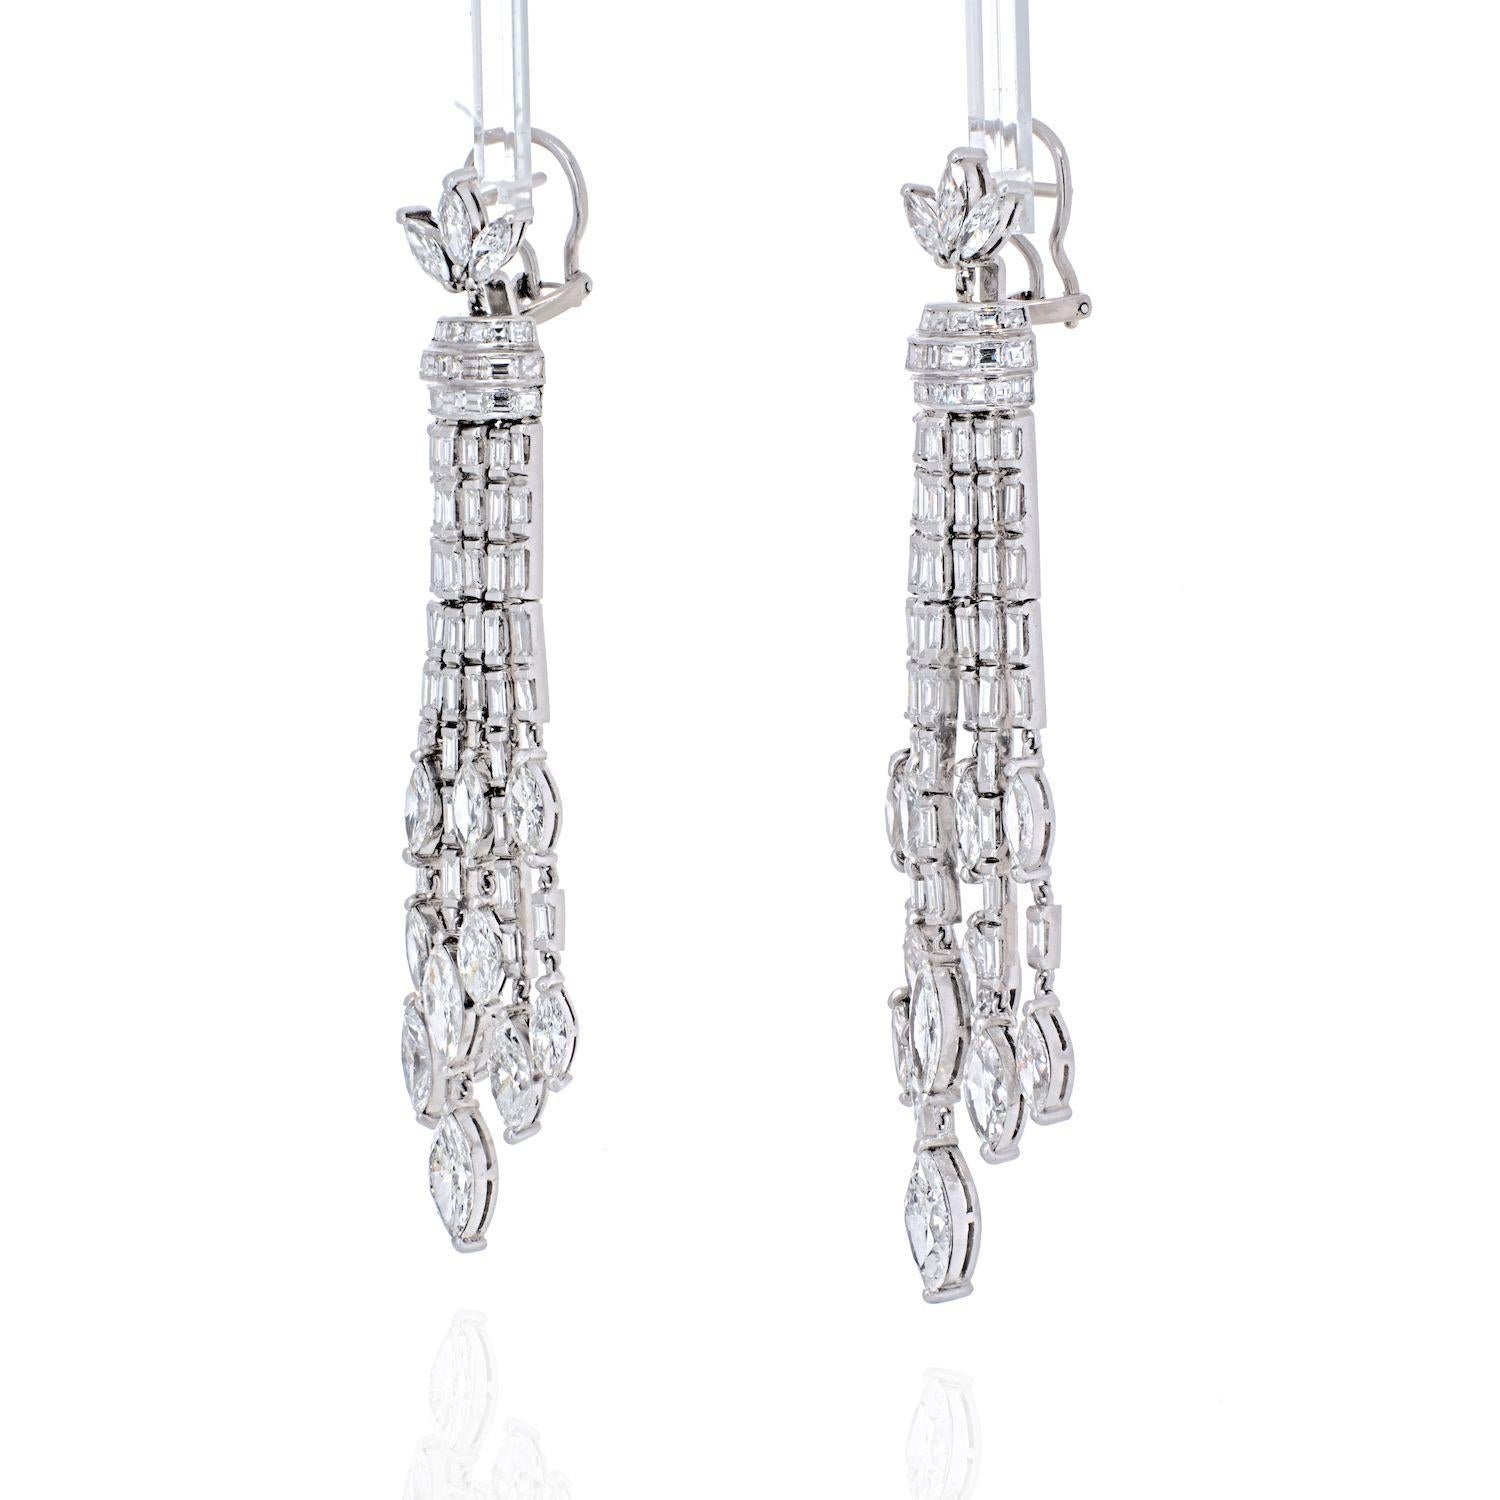 Make a compelling statement of fashion with these spectacular diamond drop earrings from our curated estate jewelry collection. Created in rich platinum, each dramatic chandelier-style drop showcases seven linear rows of shimmering baguette-cut and